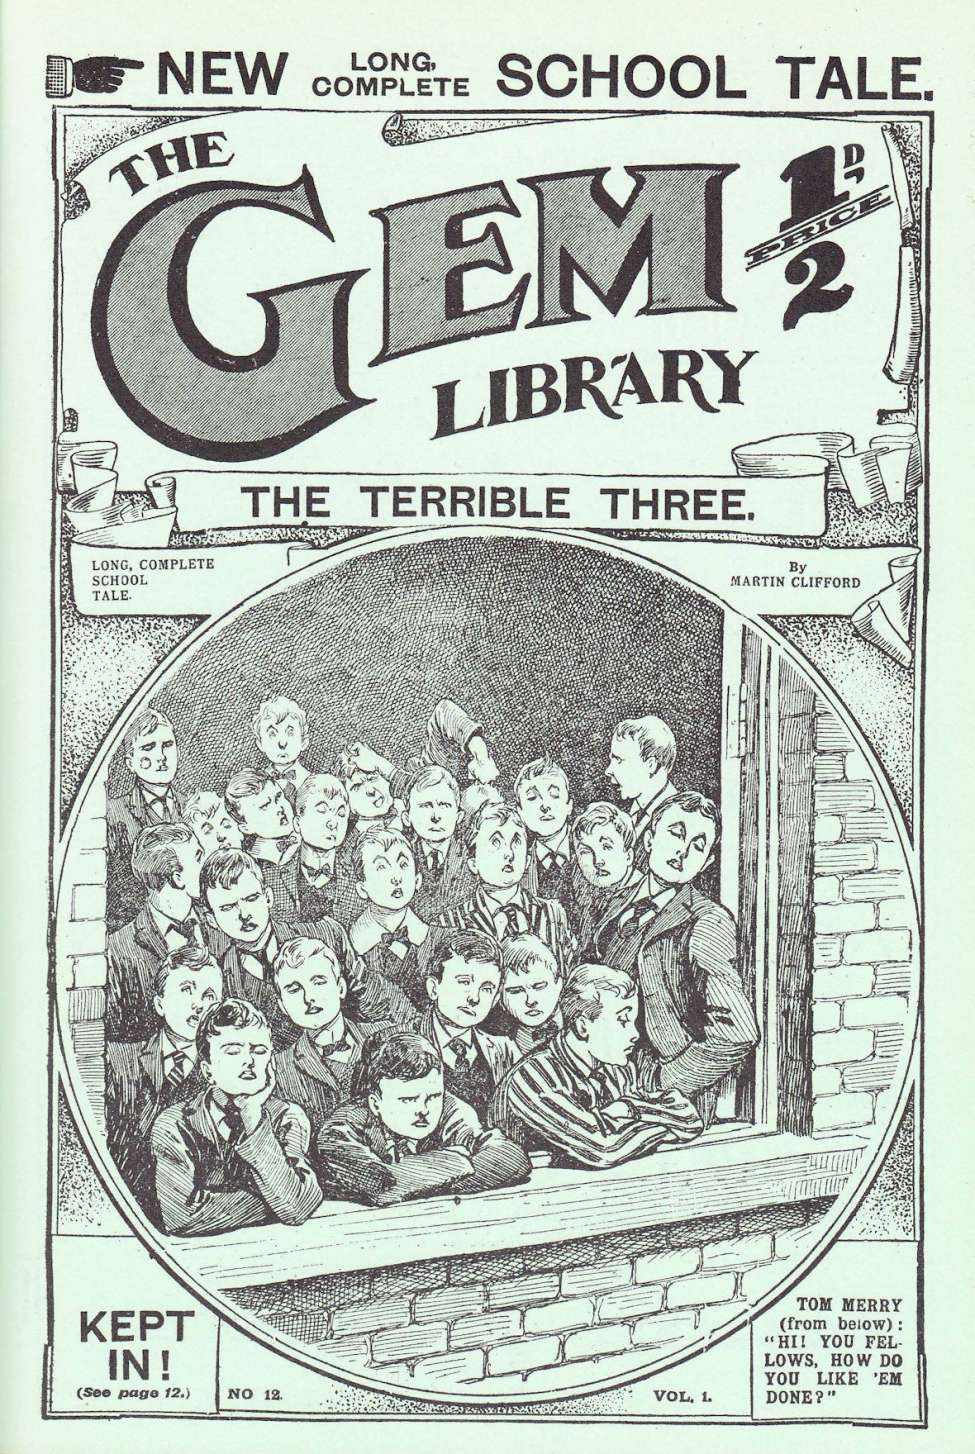 Book Cover For The Gem v1 12 - The Terrible Three